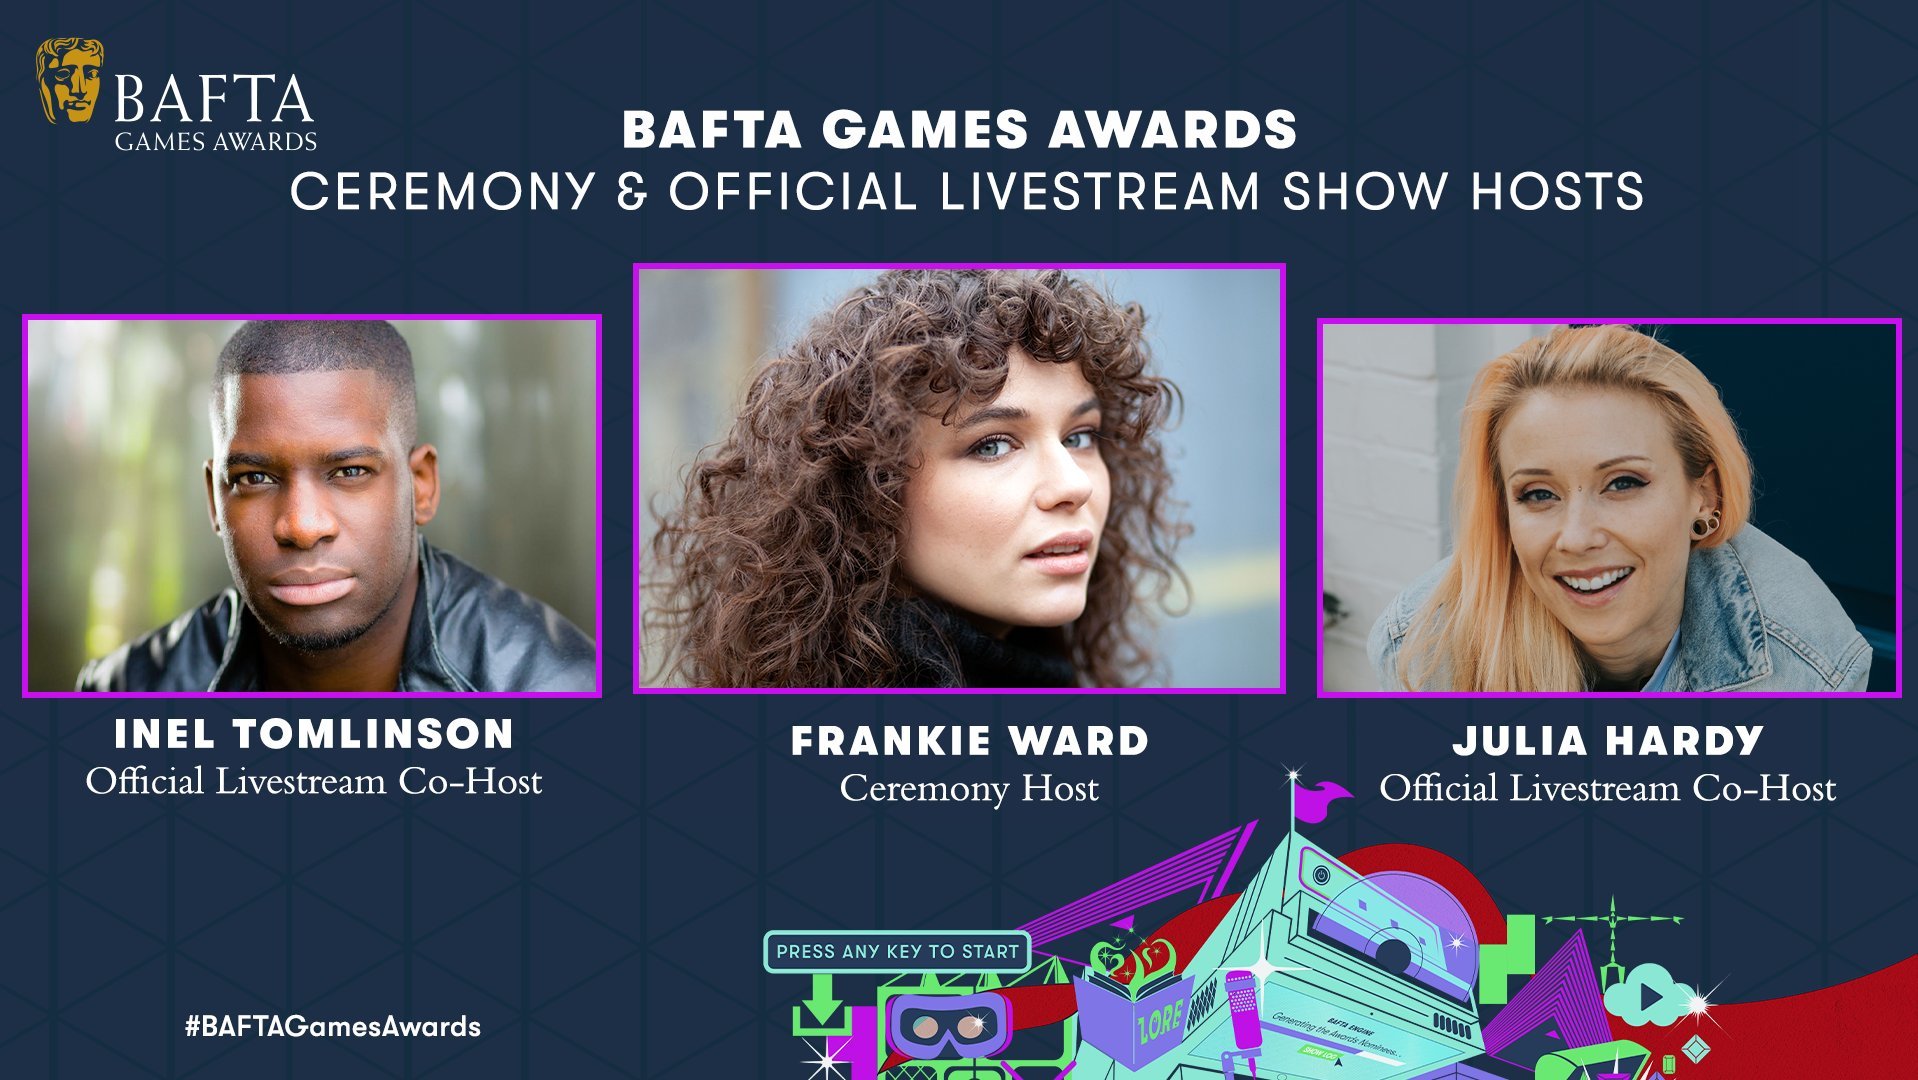 Inel joins the Official Bafta Games Awards Host Team - Inel Tomlinson